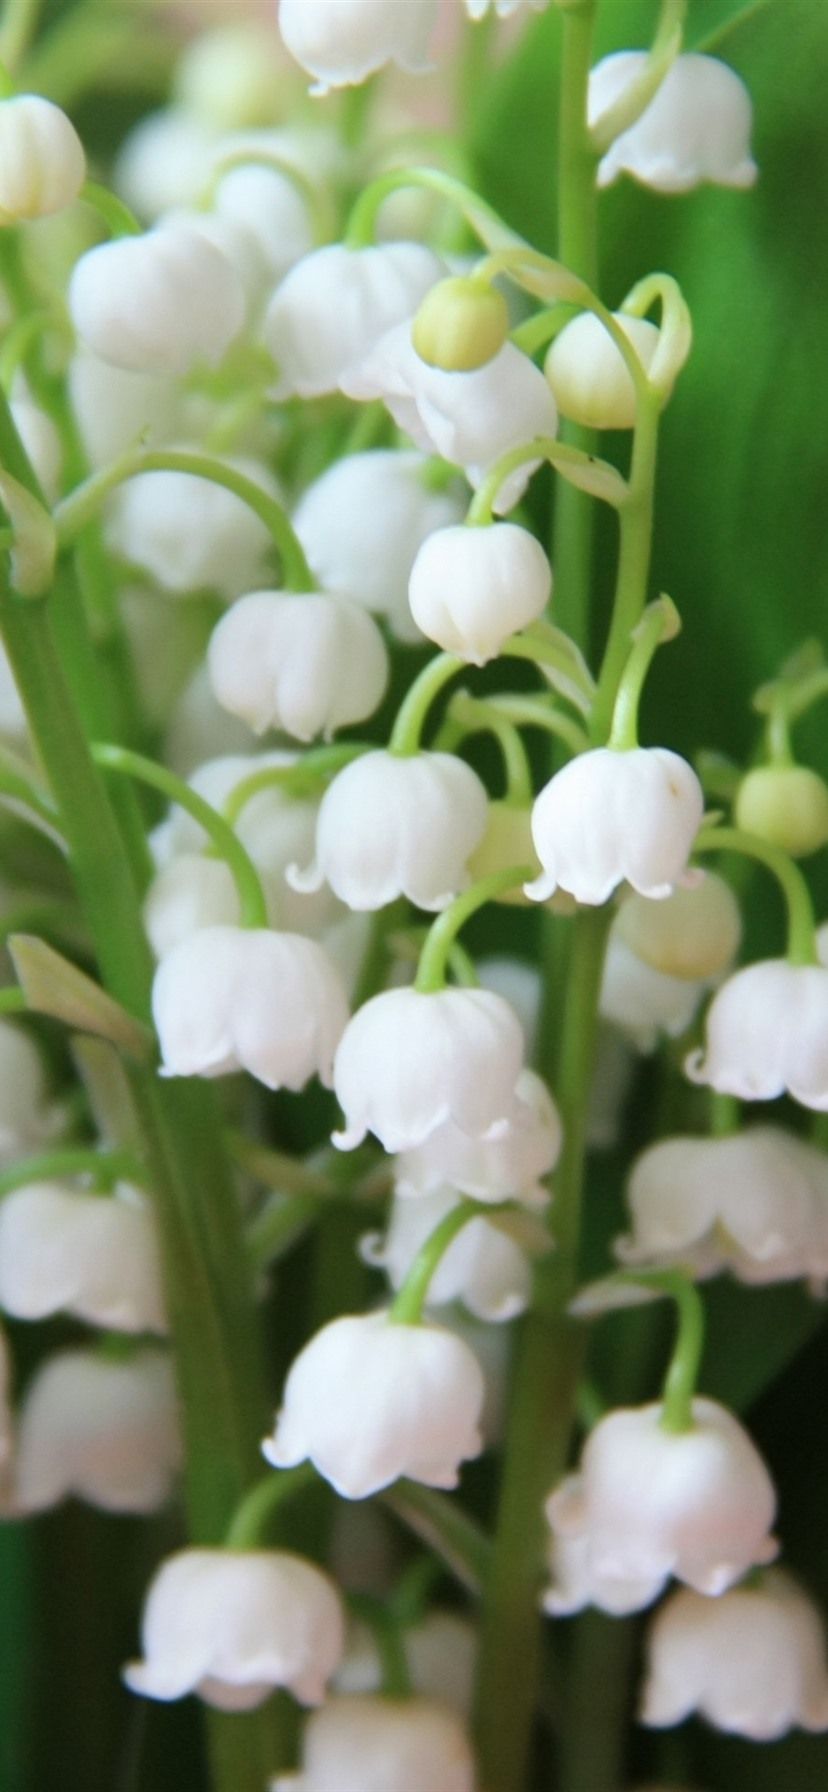 Lily Of The Valley, White Little Flowers, Spring 1080x1920 IPhone 8 7 6 6S Plus Wallpaper, Background, Picture, Image